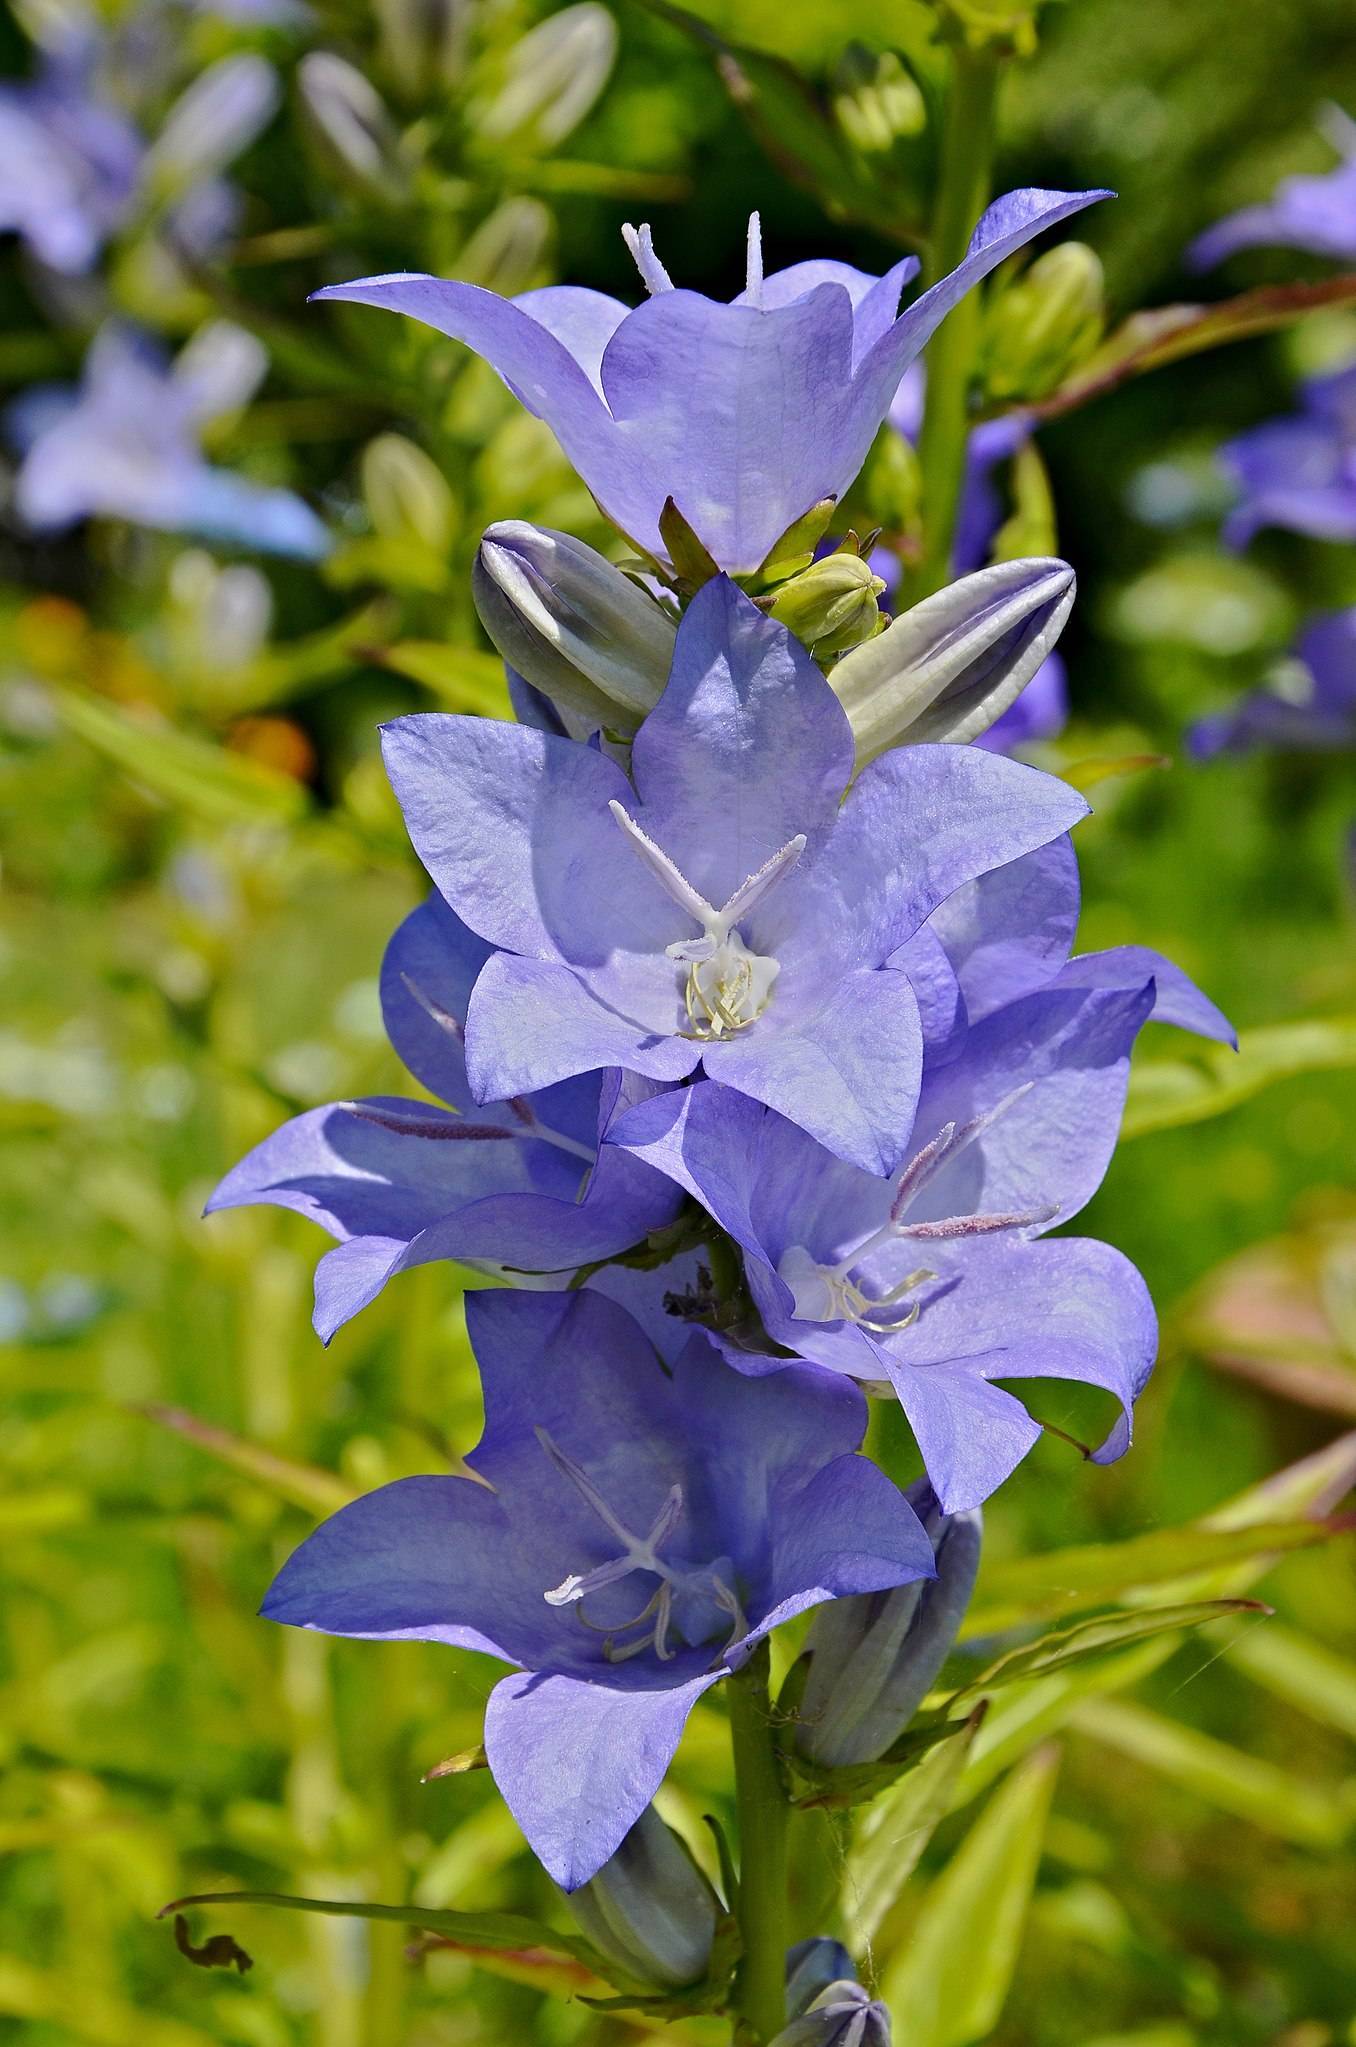 light-blue flowers with lavender stigmas, cream stamens, and lime leaves